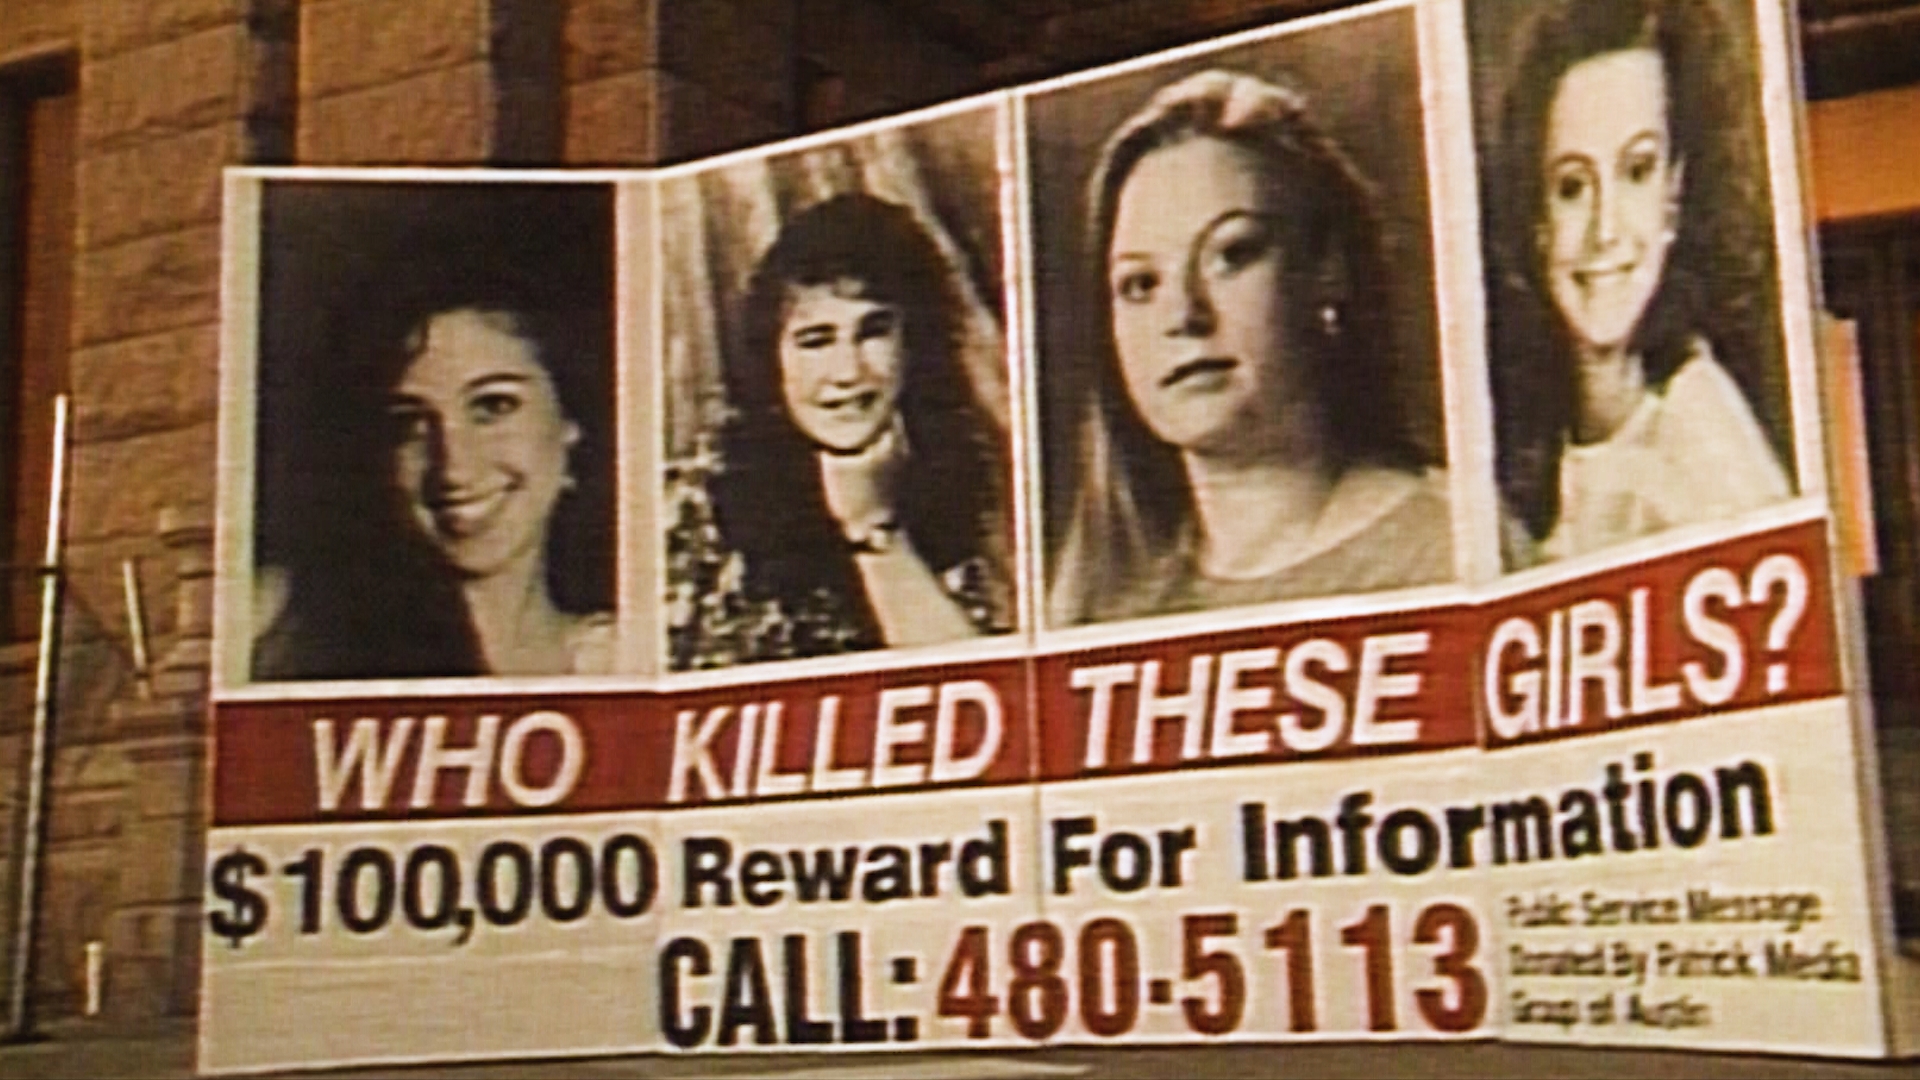 Despite trials and thousands of leads, the 32-year-old case remains unsolved, leaving families with no answers. Here is past WFAA coverage of this investigation.